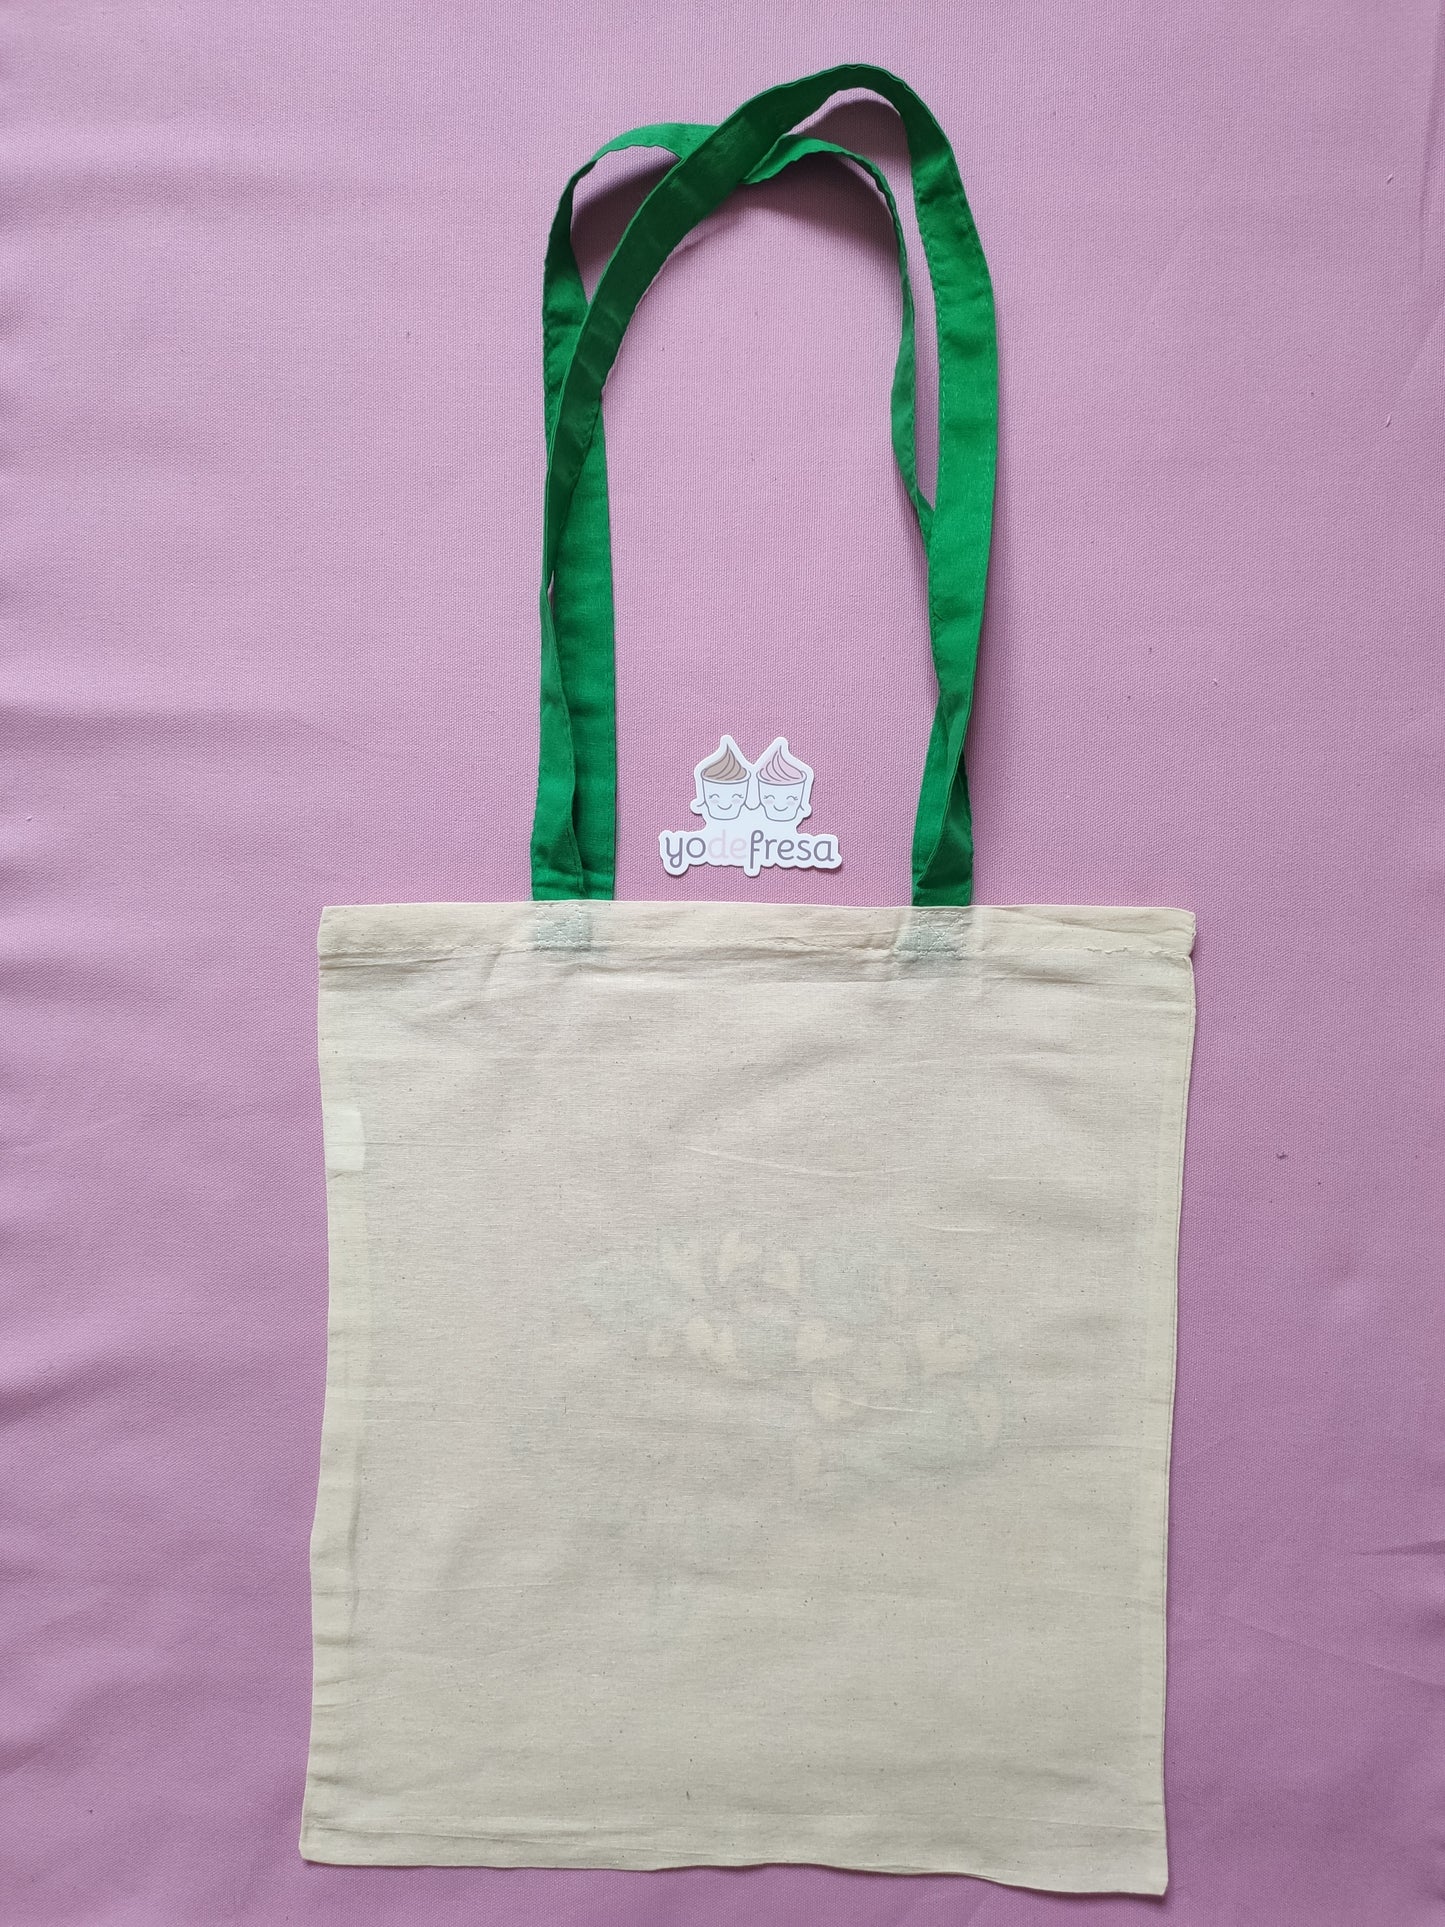 Tote bag - Be kind to your mind